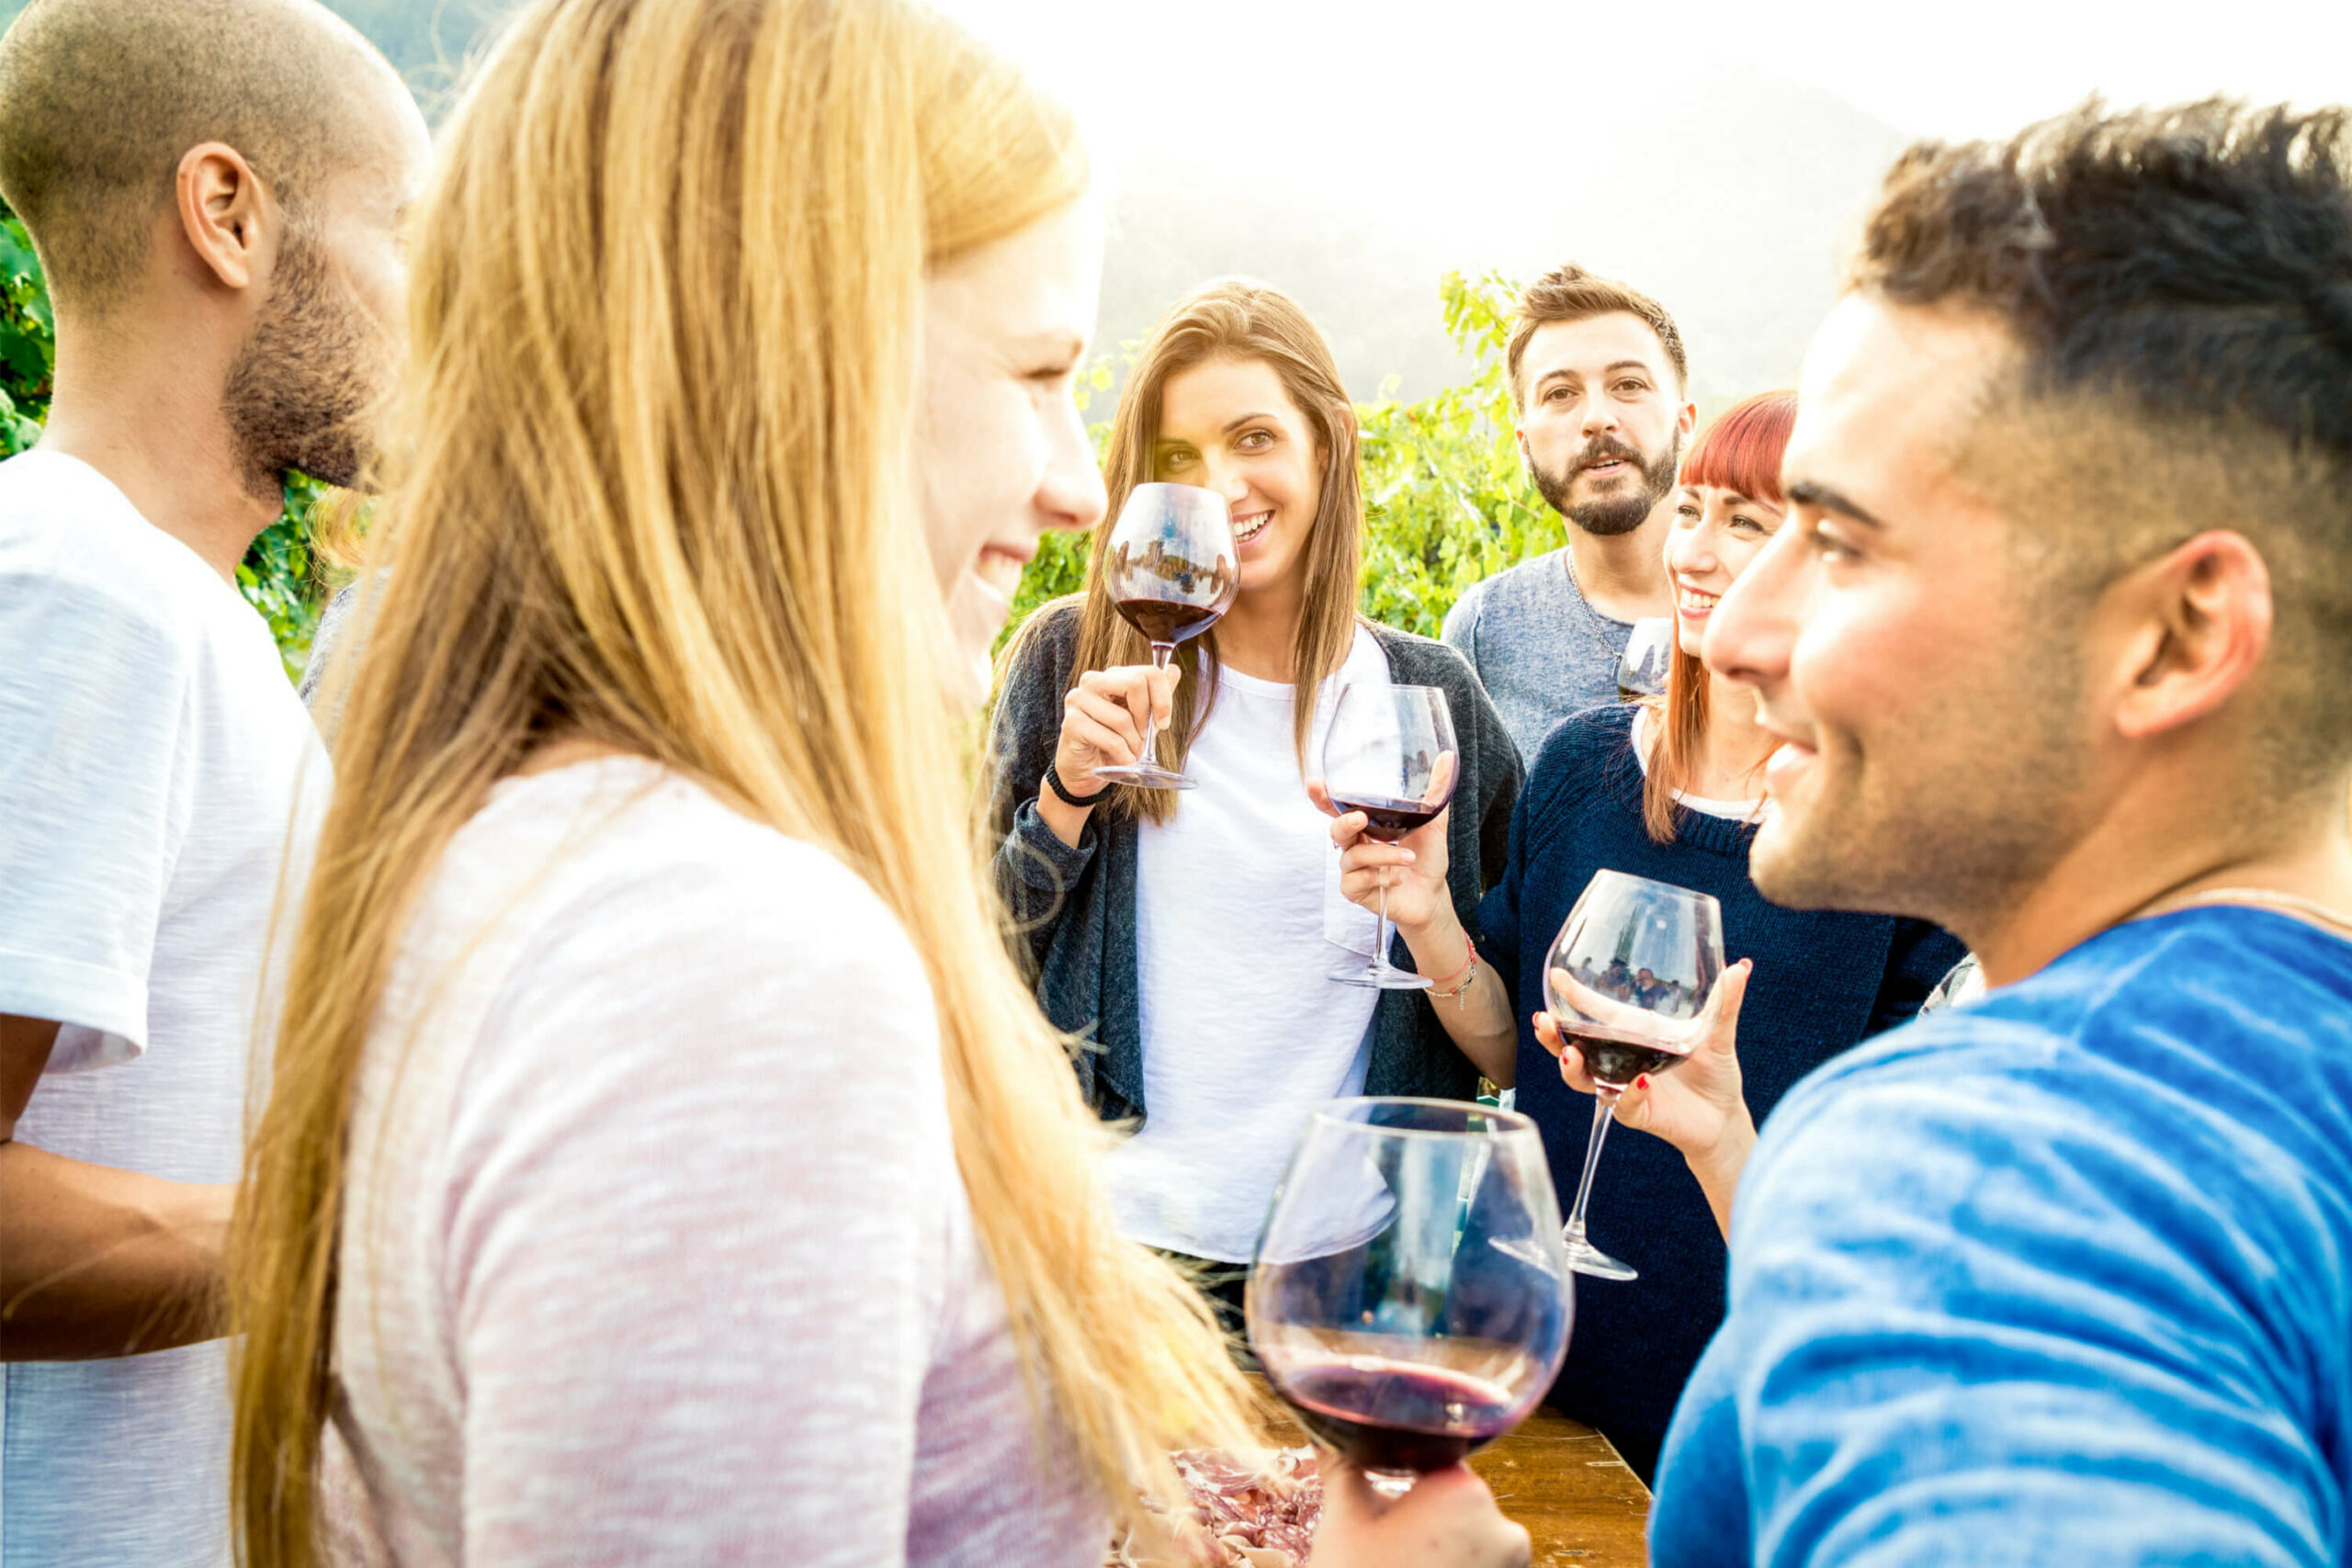 A group of people enjoying wine in a vineyard during their holiday in Barcelona.